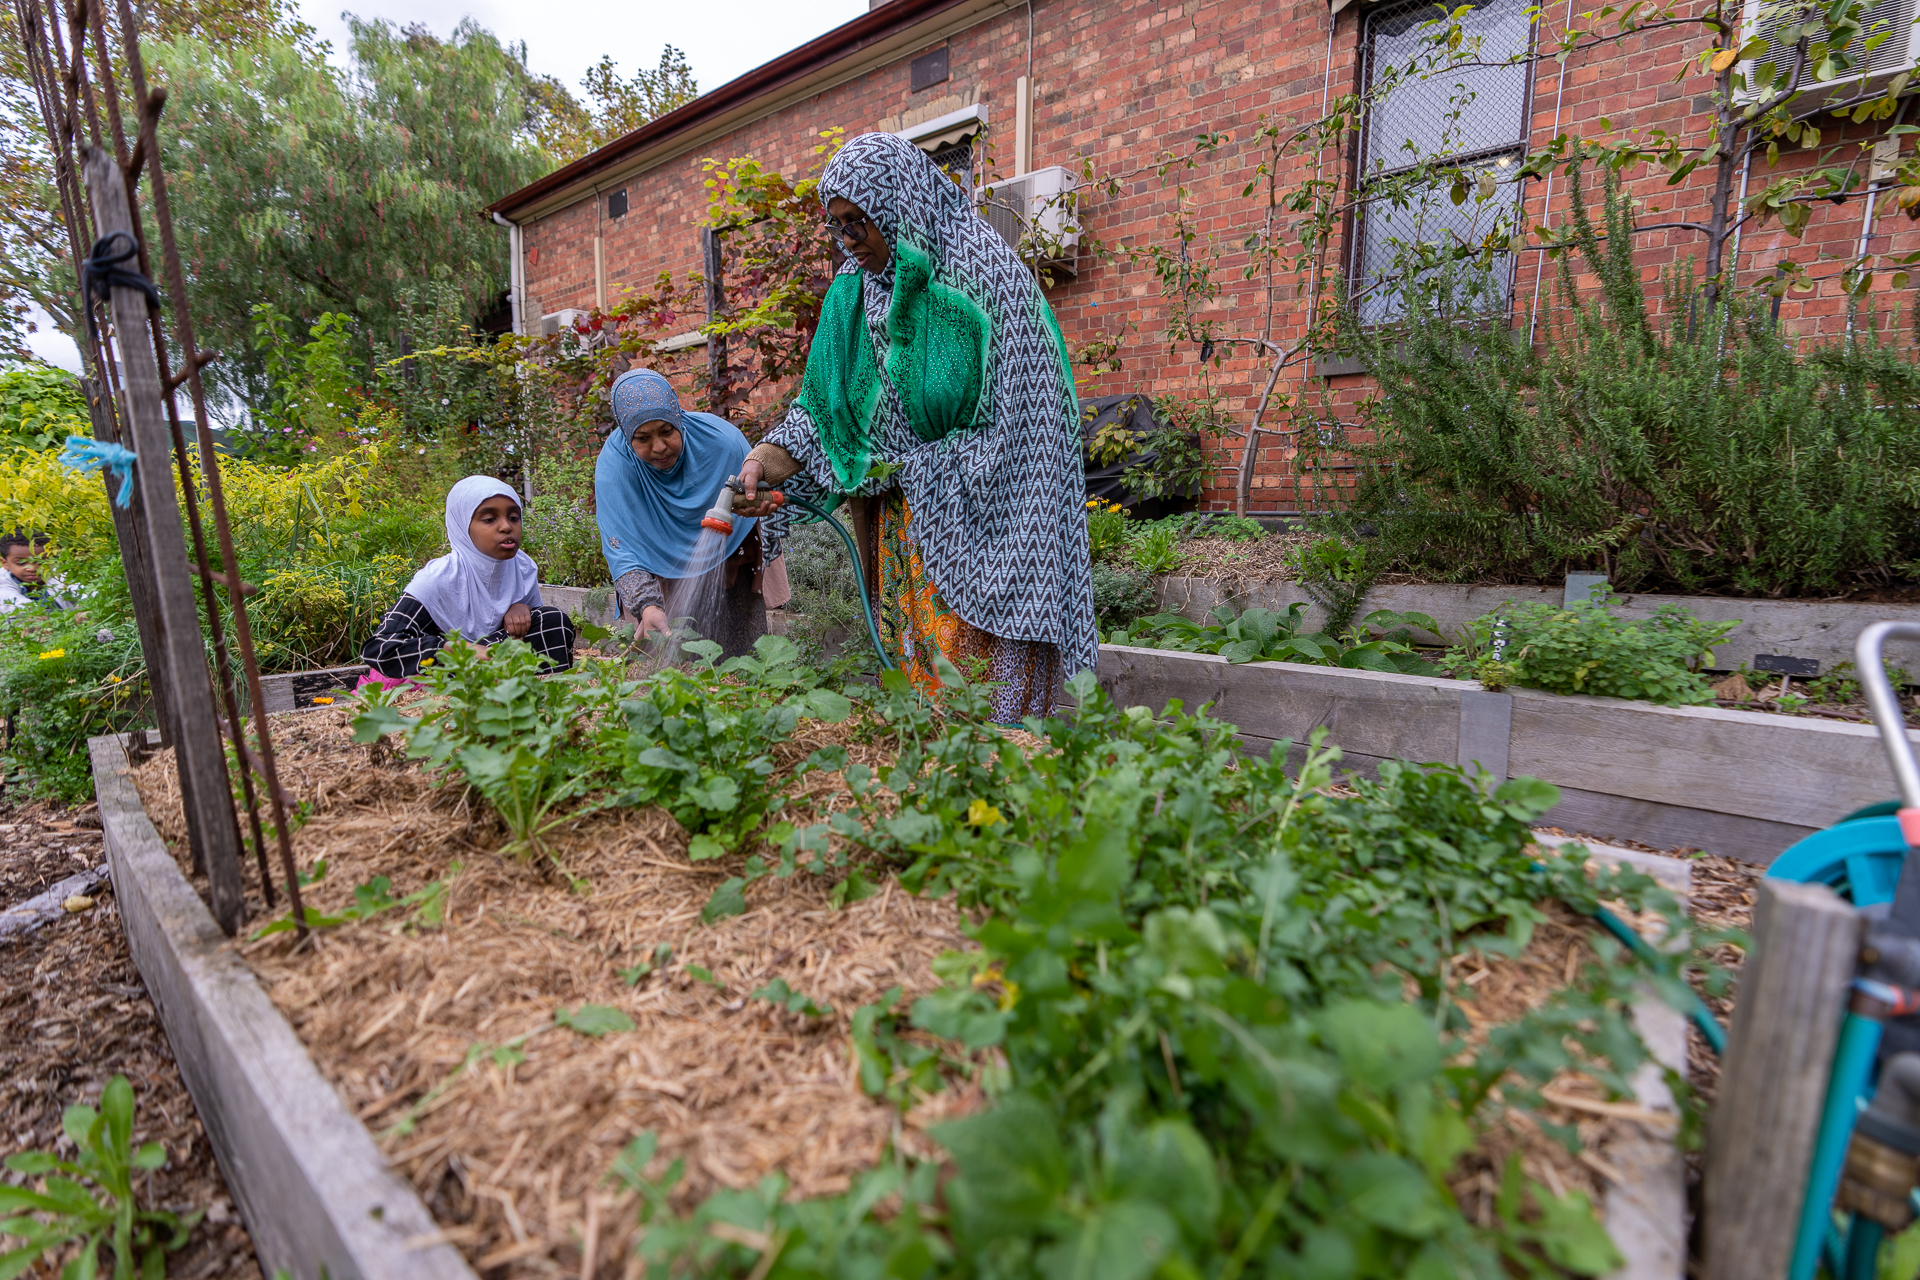 A veggie patch is in the foreground, with two women and a young girl standing at the rear, one of the women is watering the garden. 